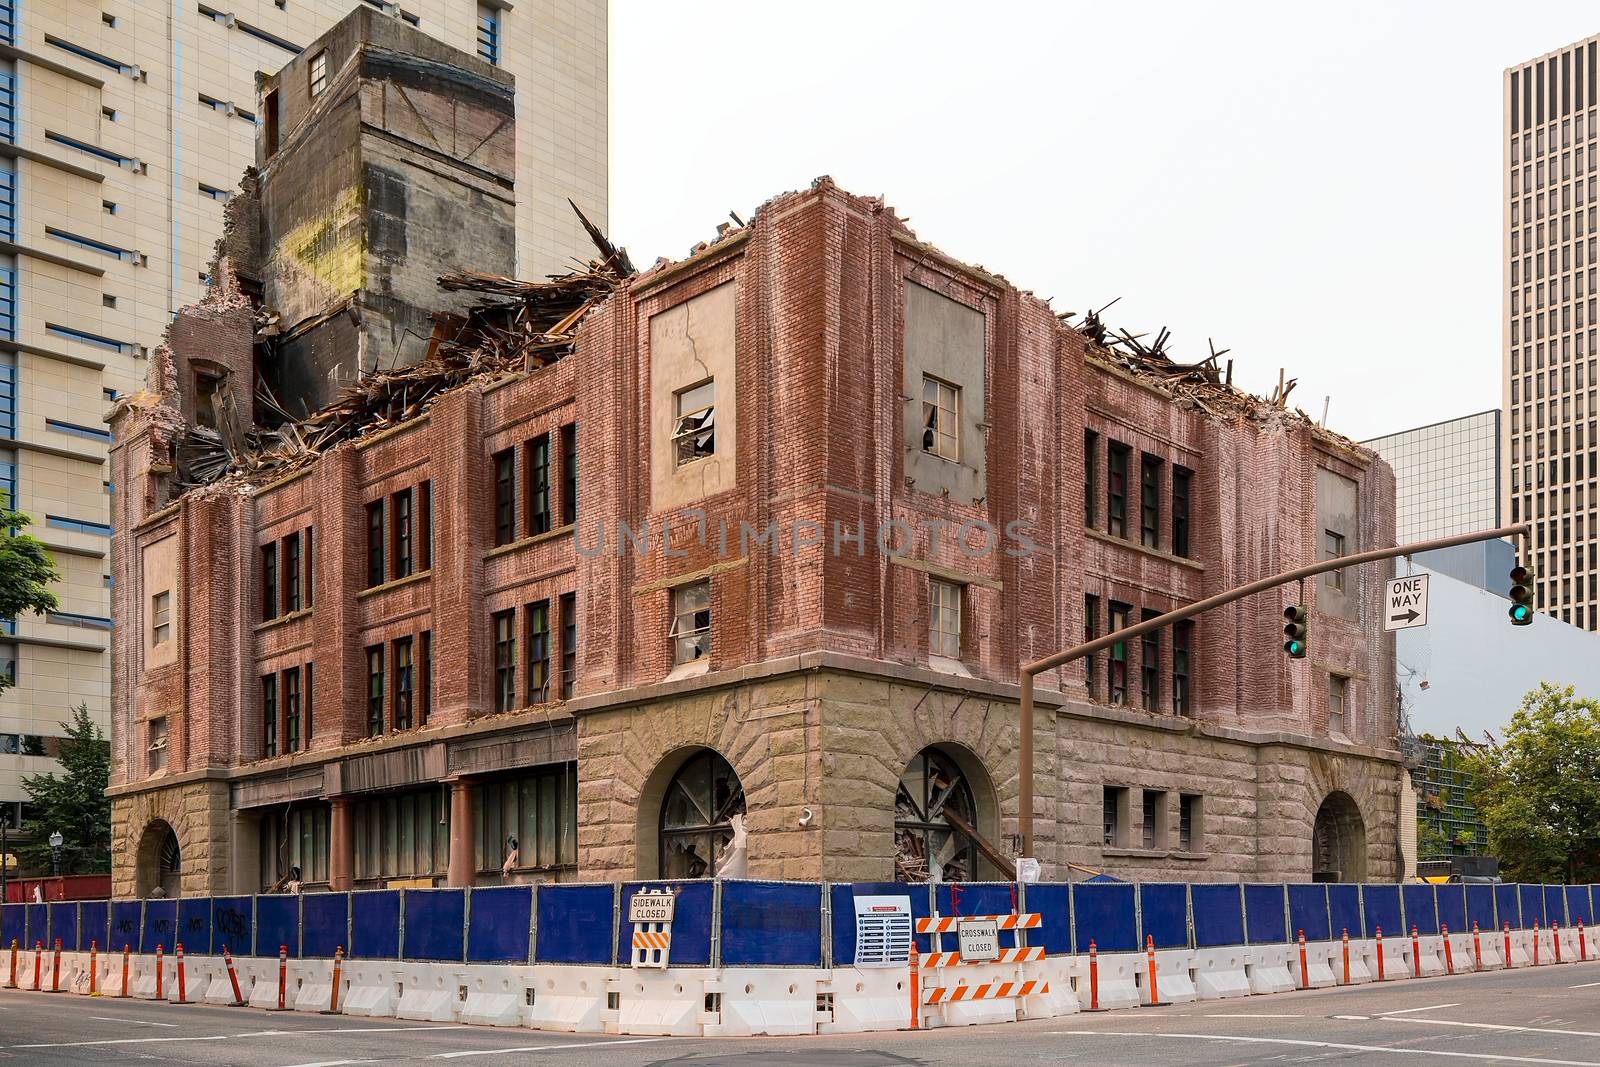 Old brick building being demolished for redevelopment in downtown Portland Oregon